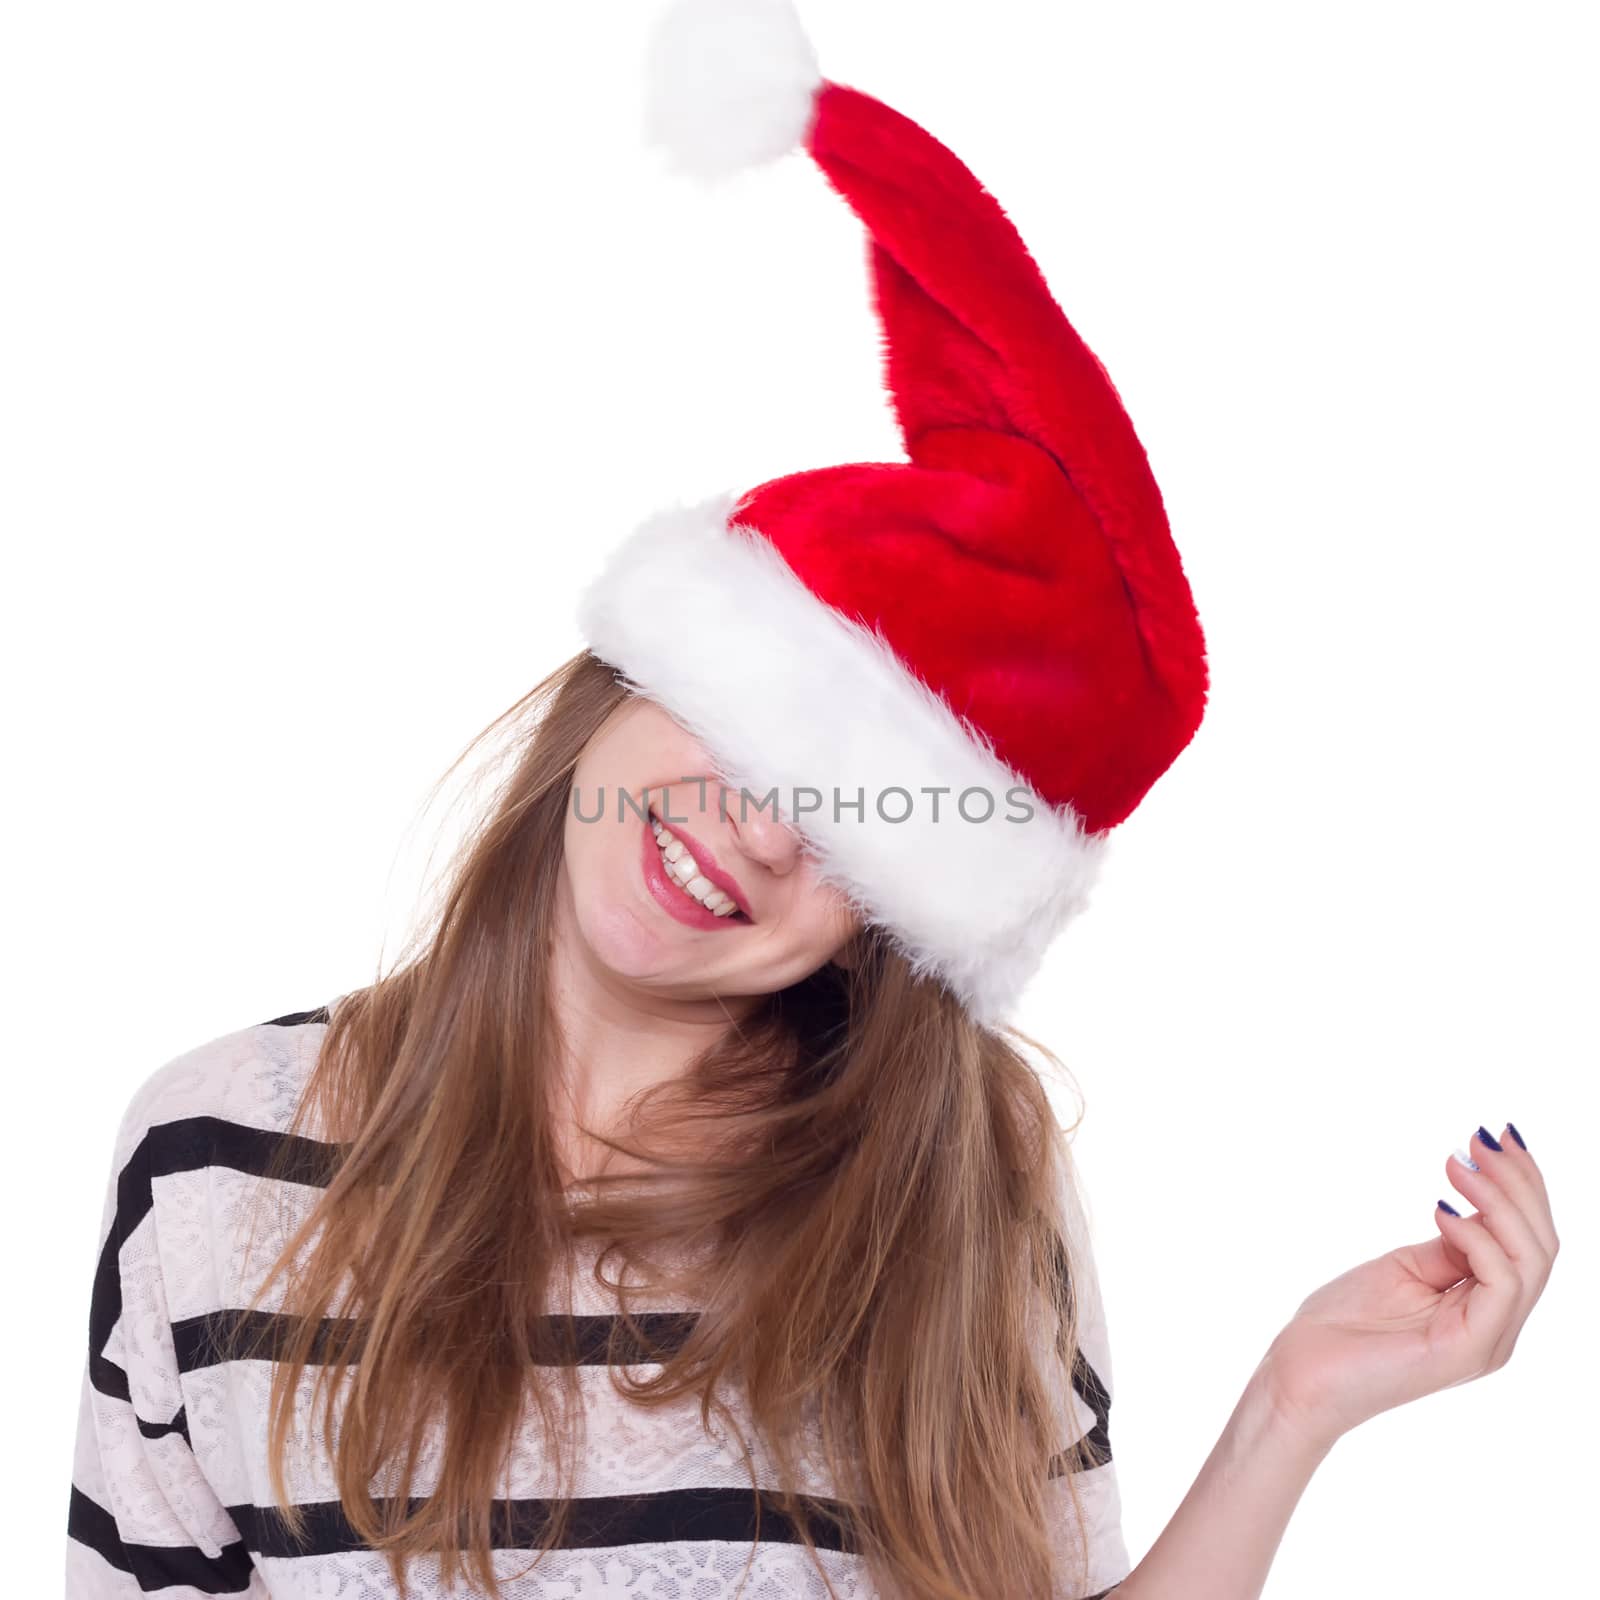 Portrait of joyful pretty woman in red santa claus hat laughing isolated on white background. Beautiful girl looking happy and excited. Happy Christmas and New Year holidays full of fun.